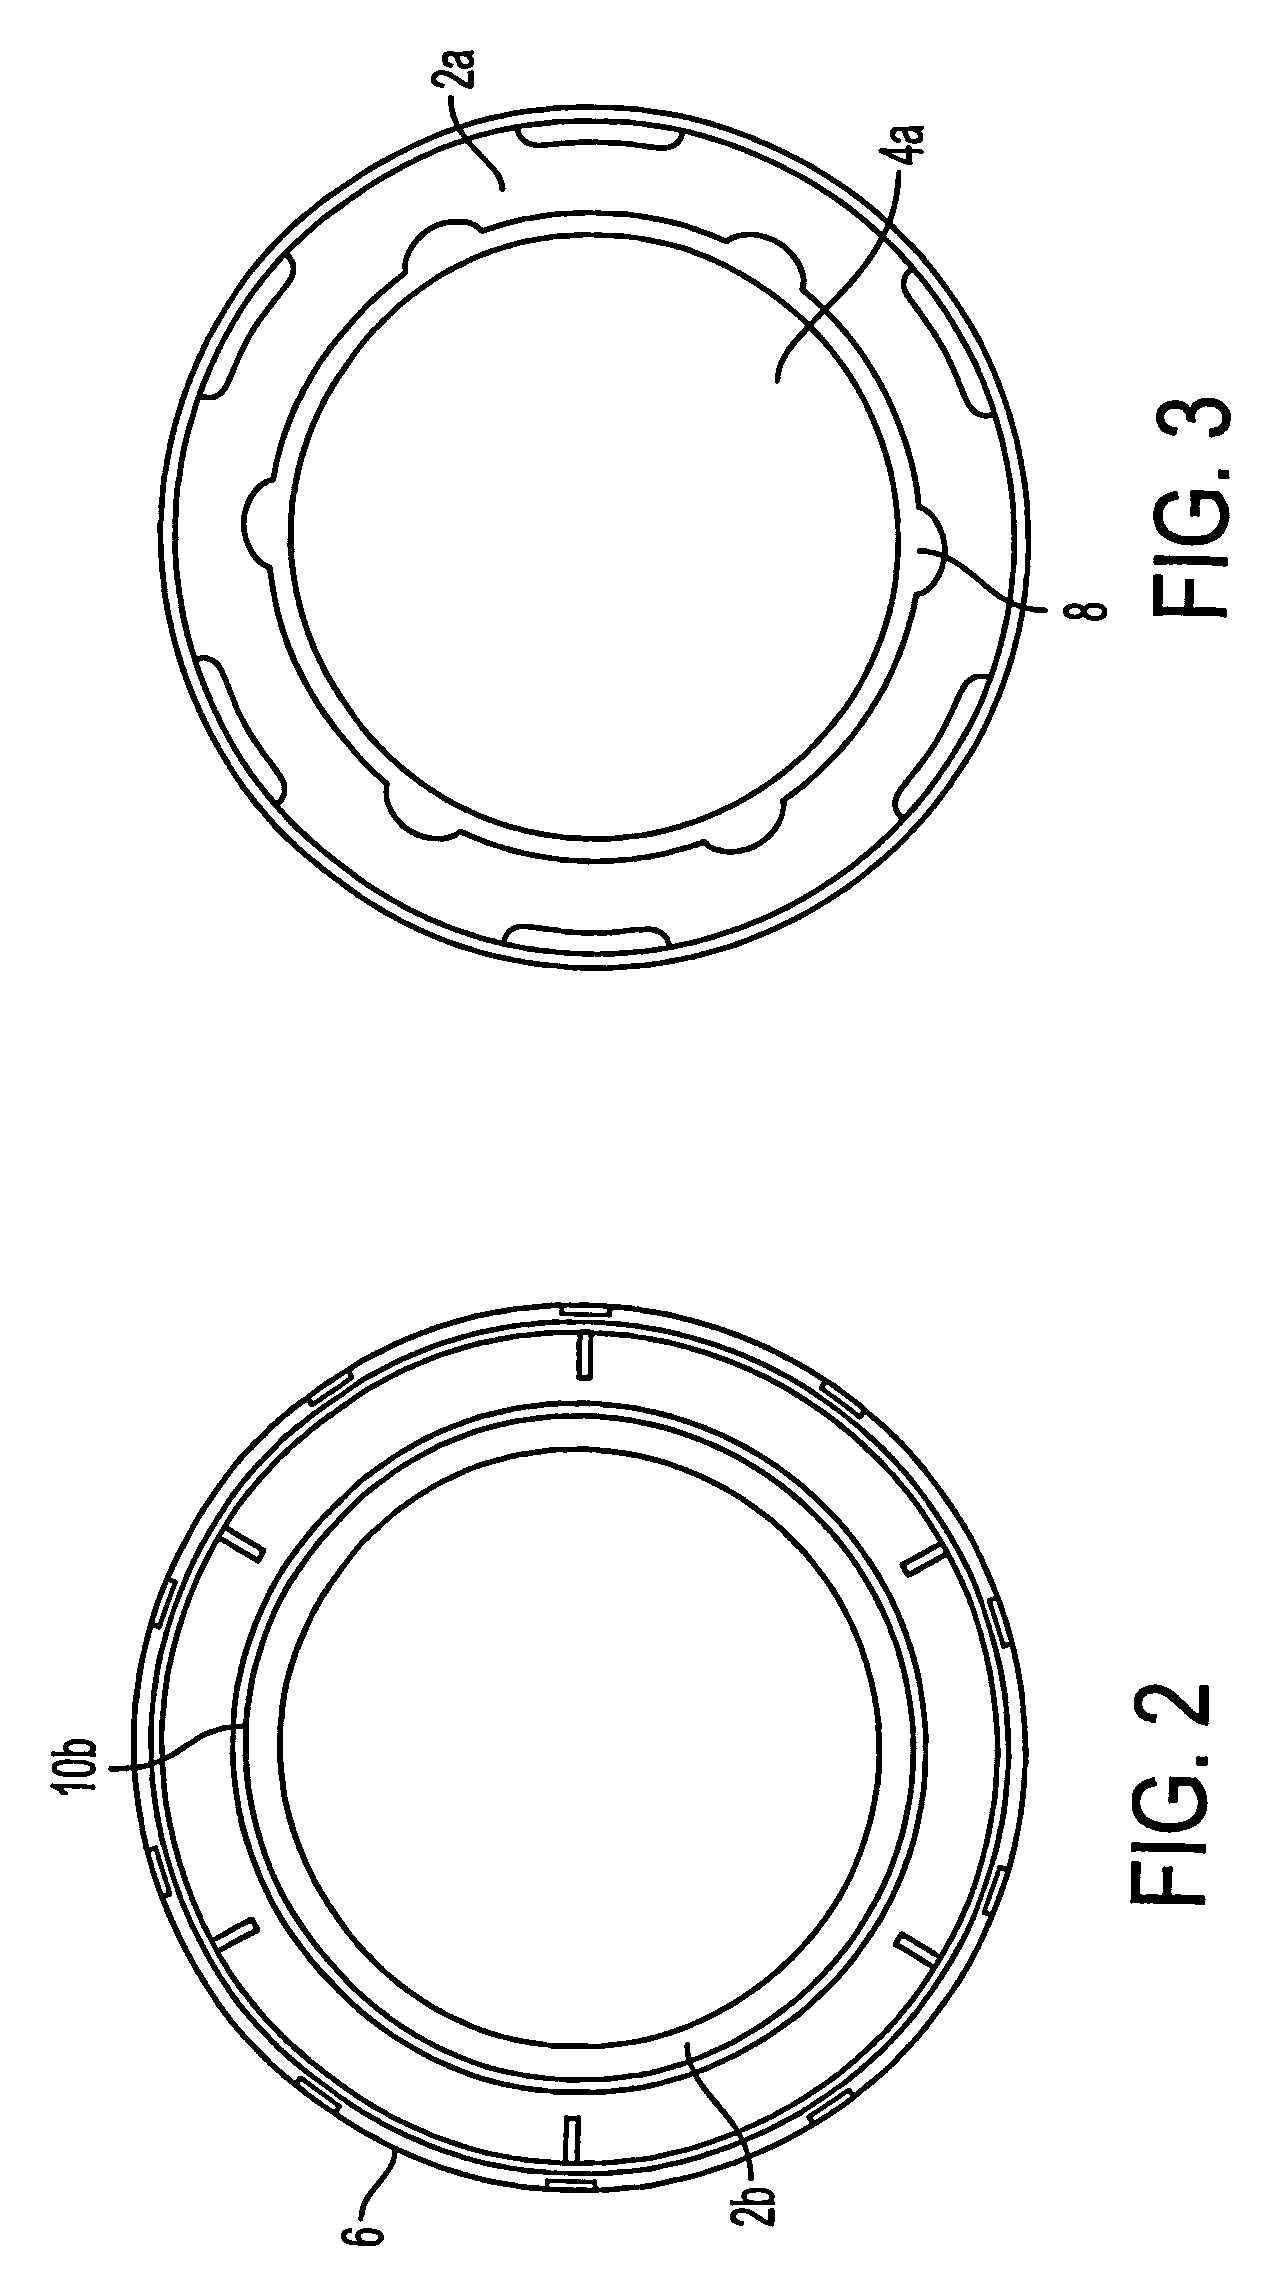 Process and device for conveying odd-shaped containers